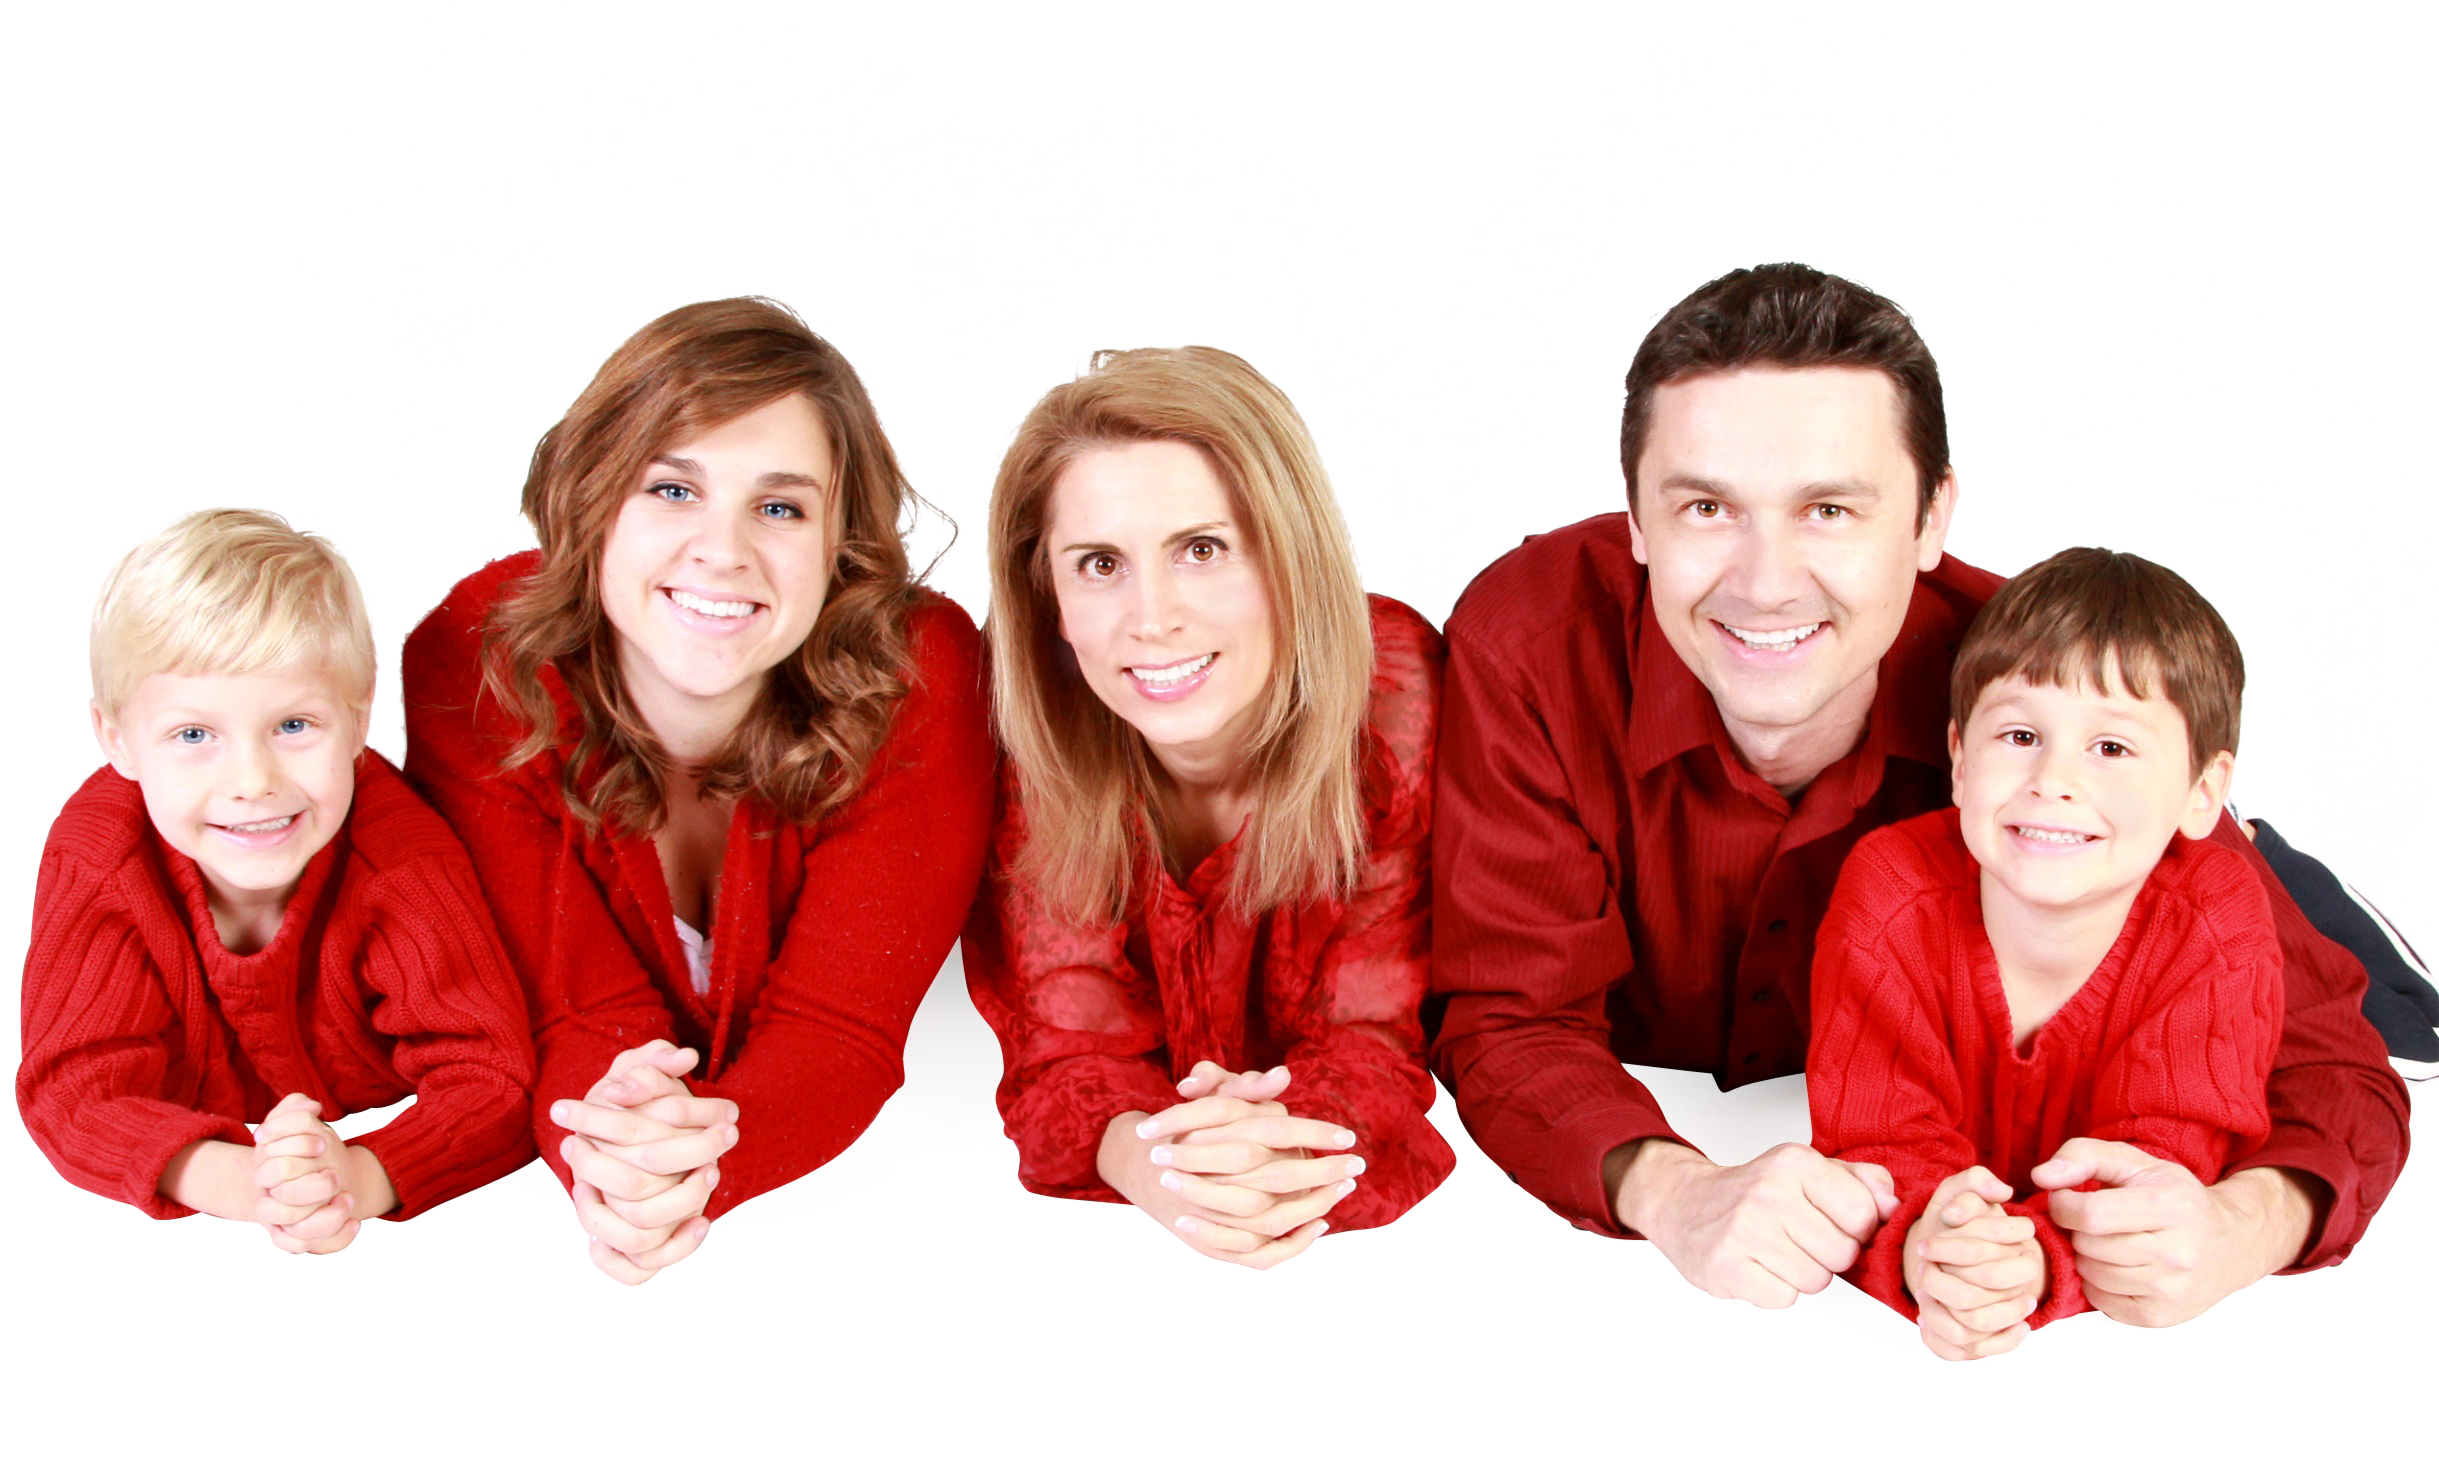 A Group Of People In Red